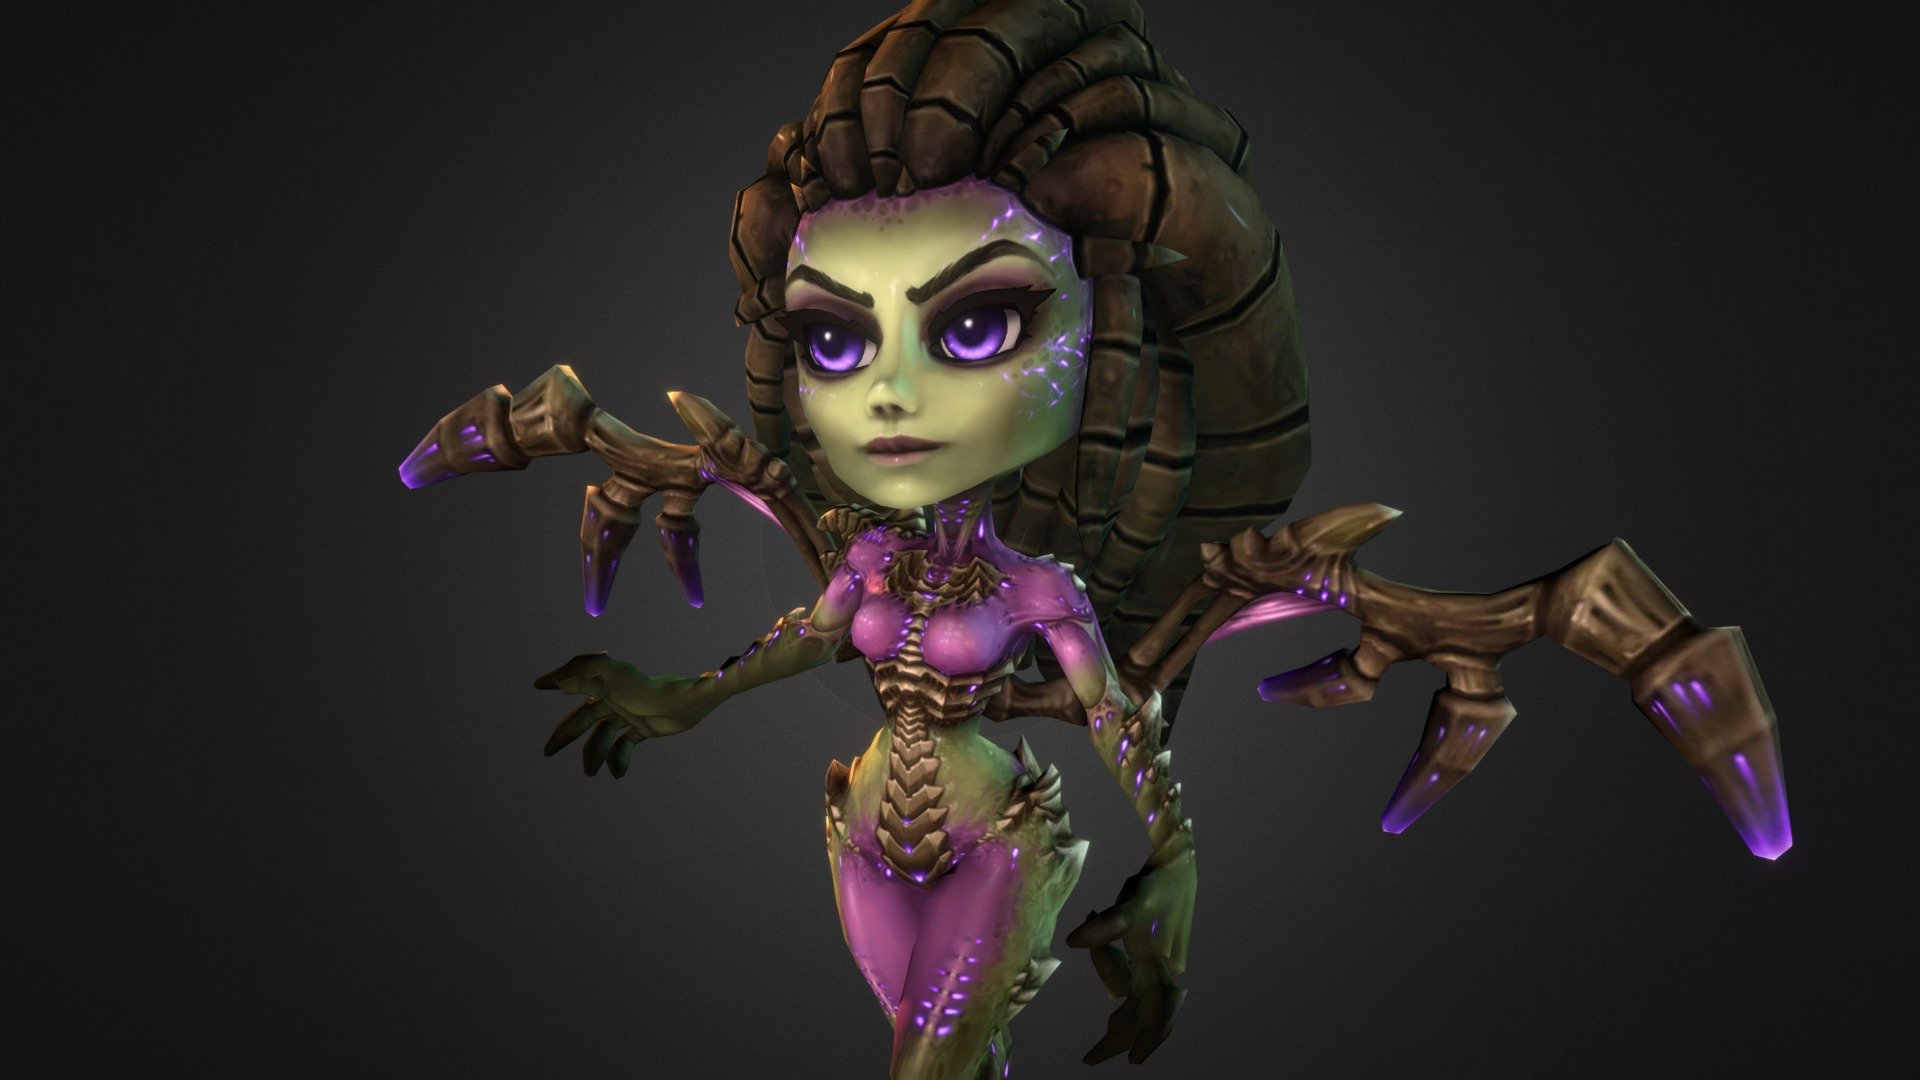 Just a small fan-art piece for a mini Queen of Blades. She may be infested, but that doesn't keep her from being adorable 3d model